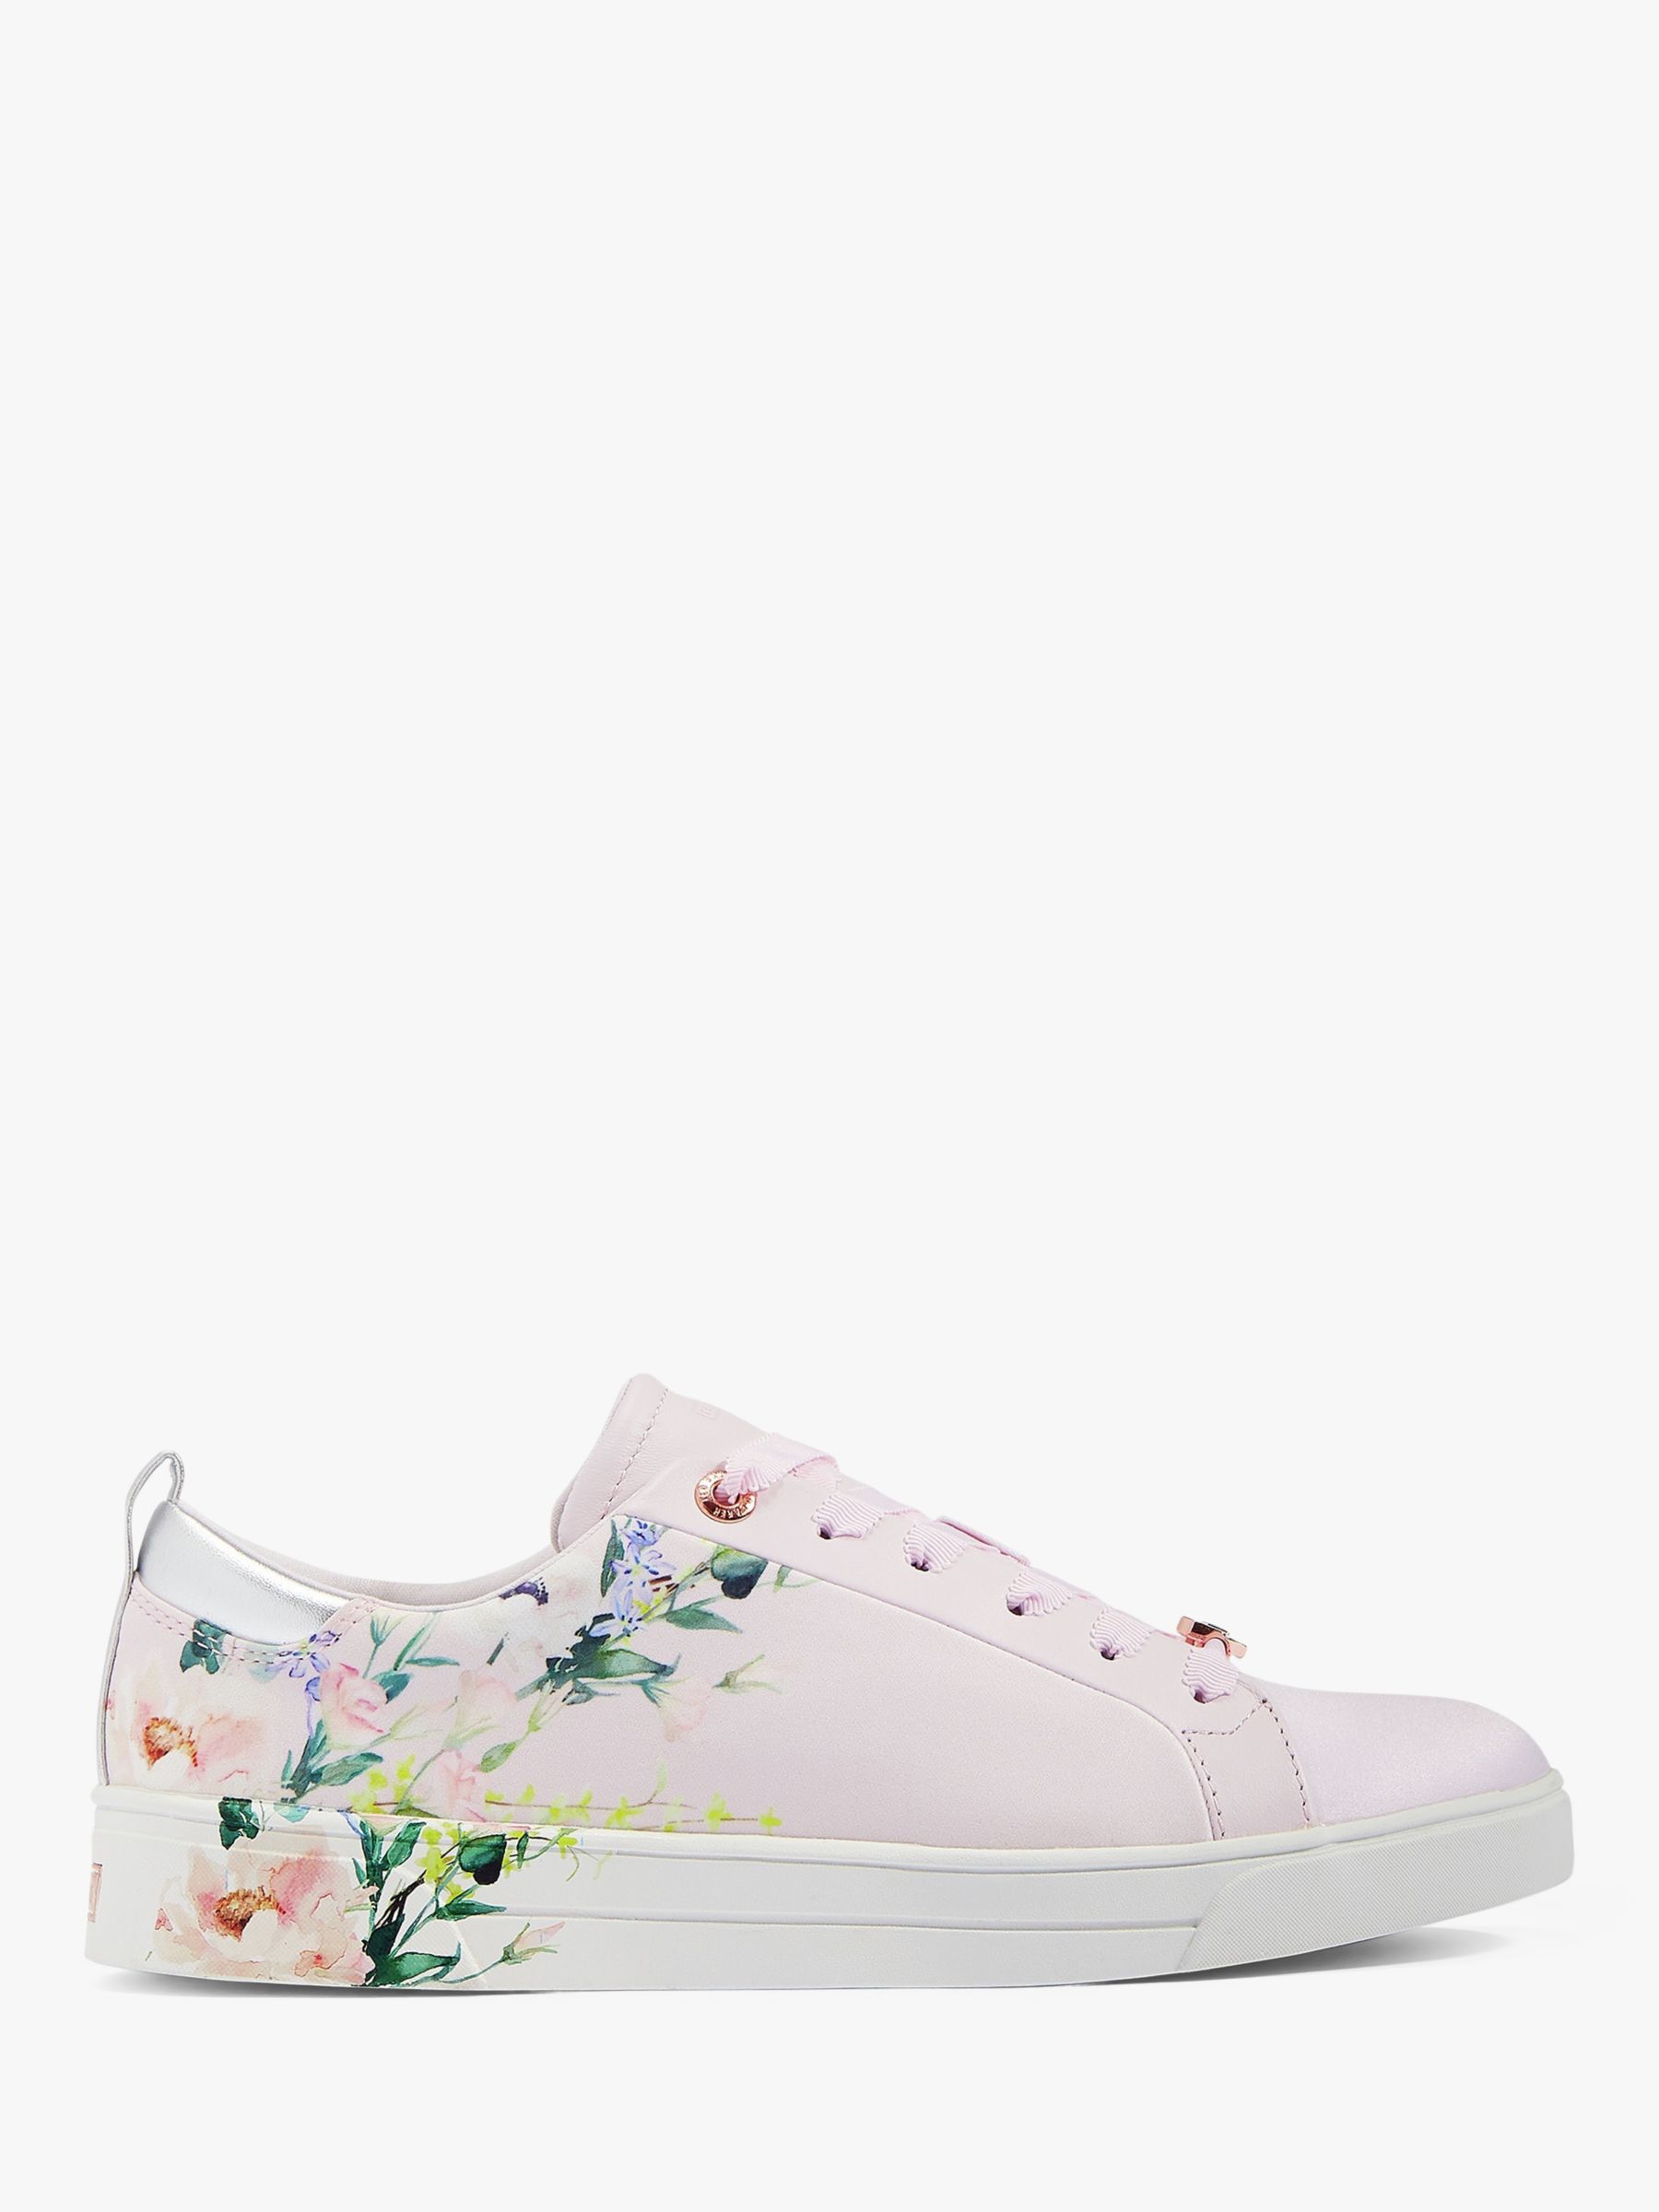 Ted Baker Rialy Printed Tennis Trainers, Light Pink